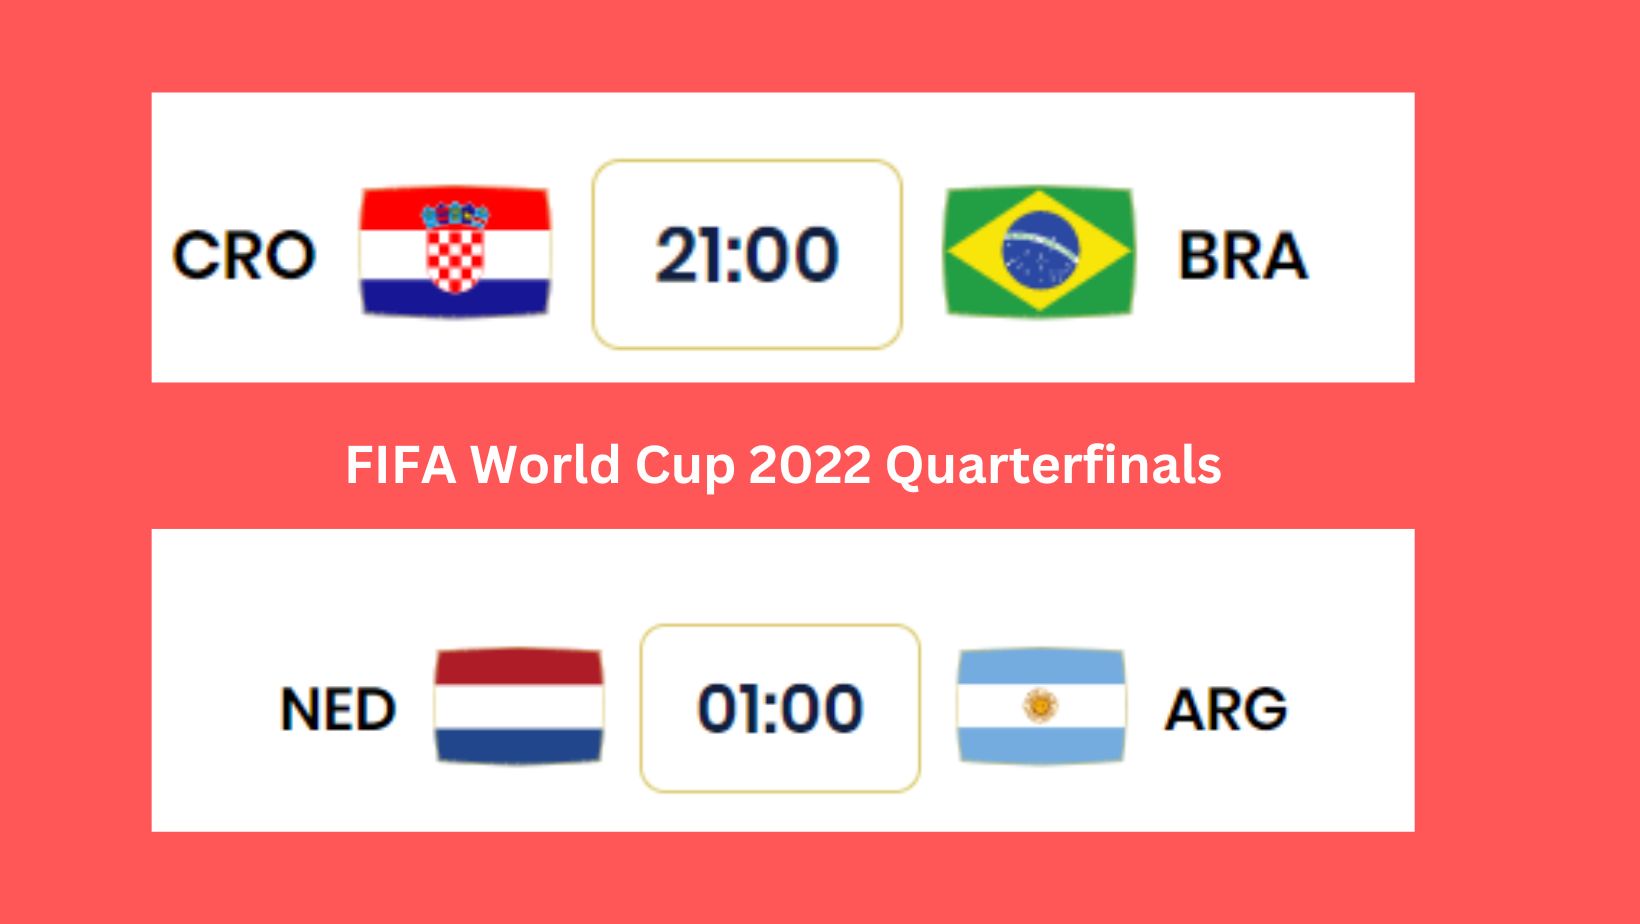 All Eyes are on Brazil vs Croatia and Argentina vs Netherlands Quarterfinals